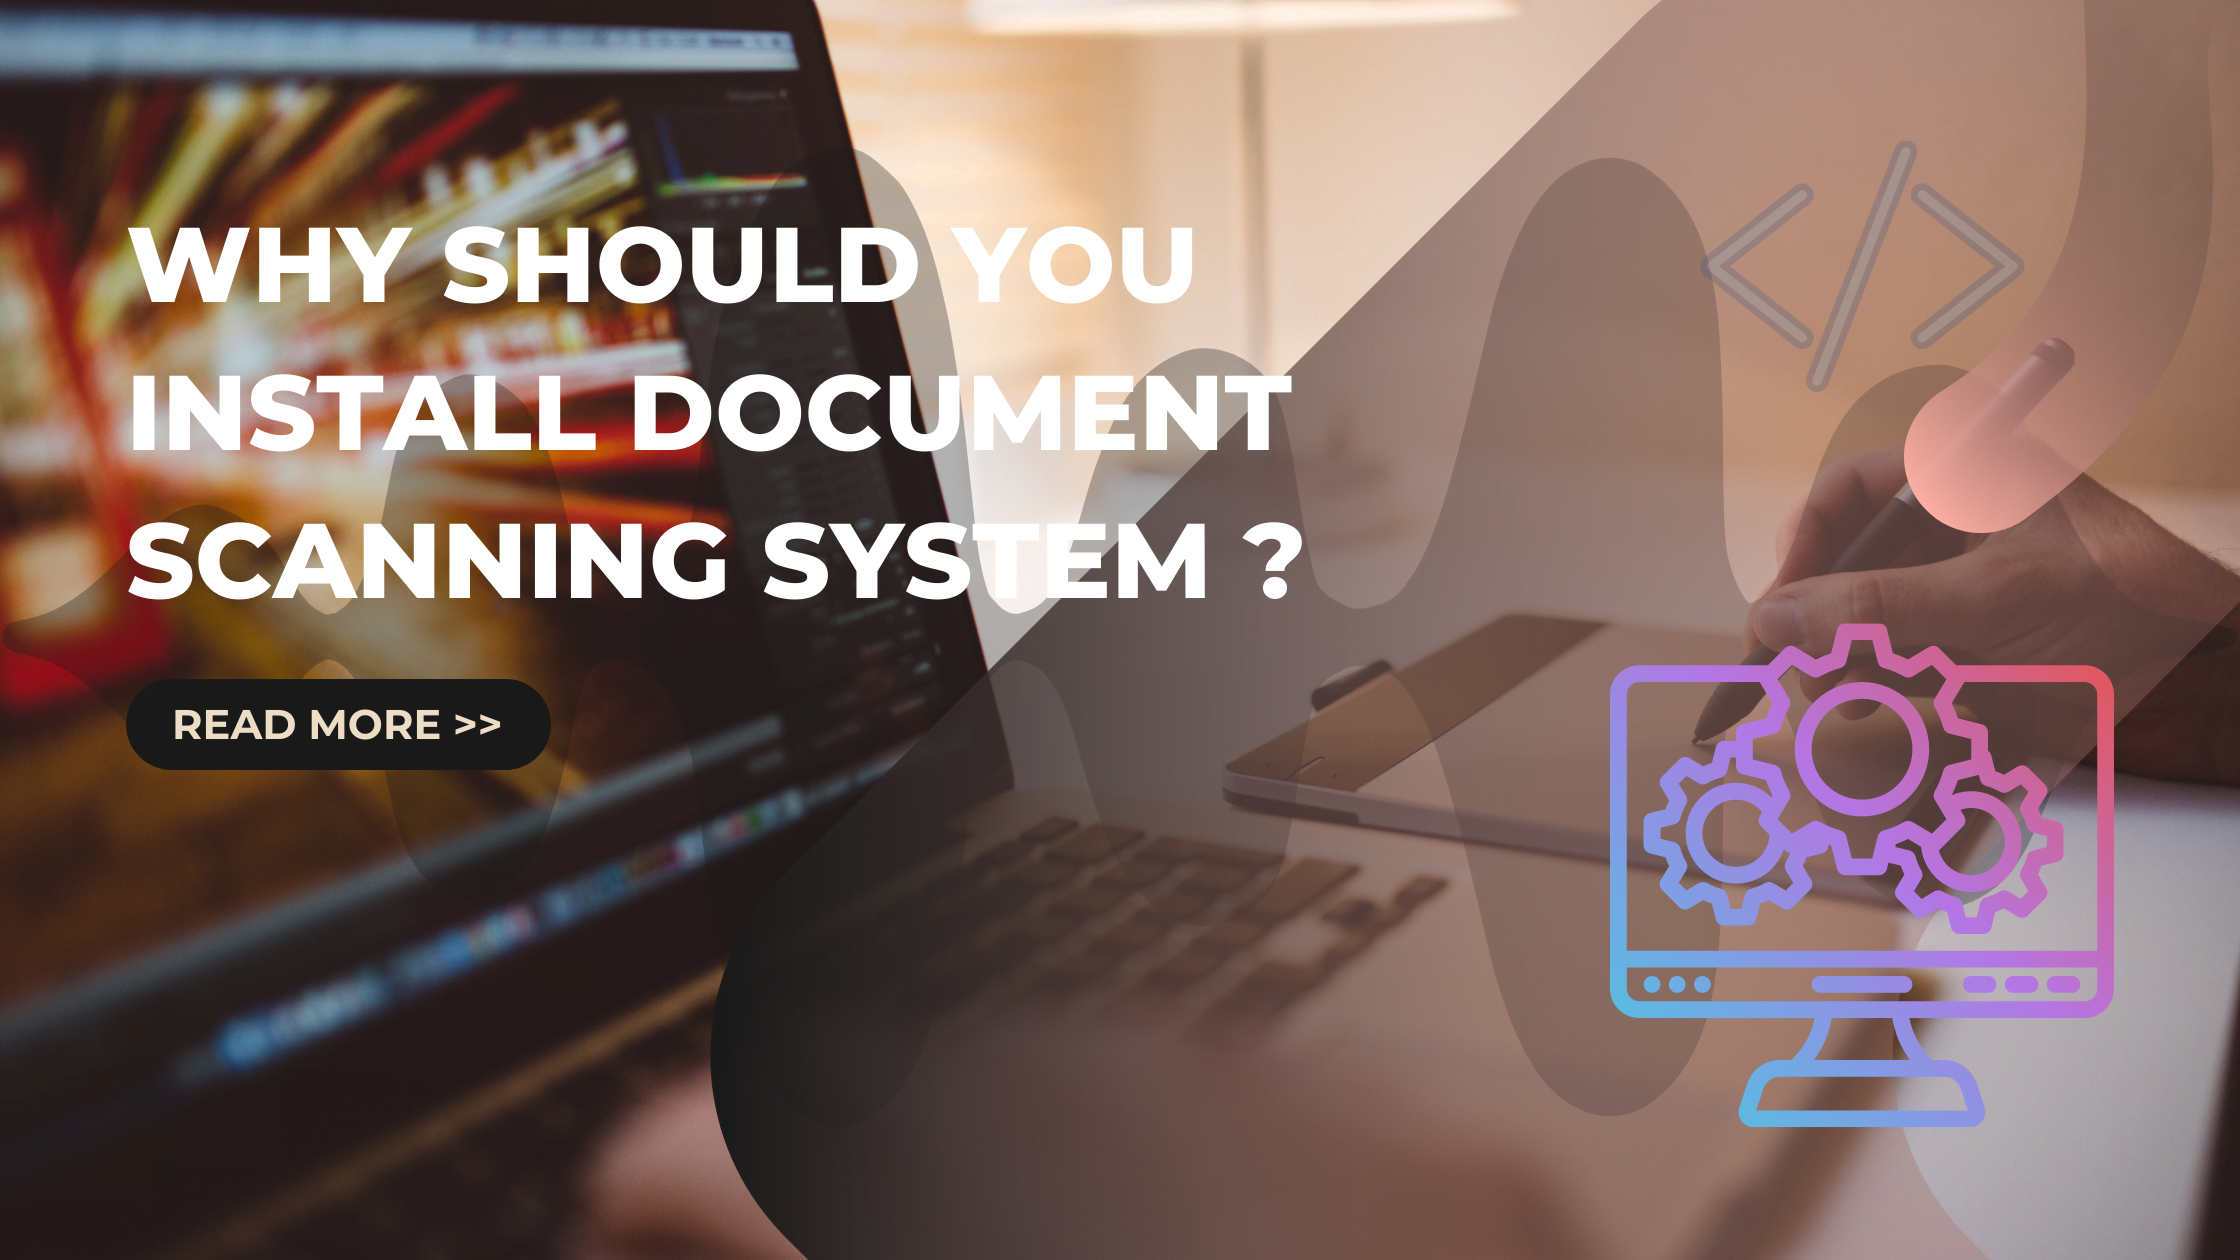 Why Should You Install Document Scanning System In Mailroom?